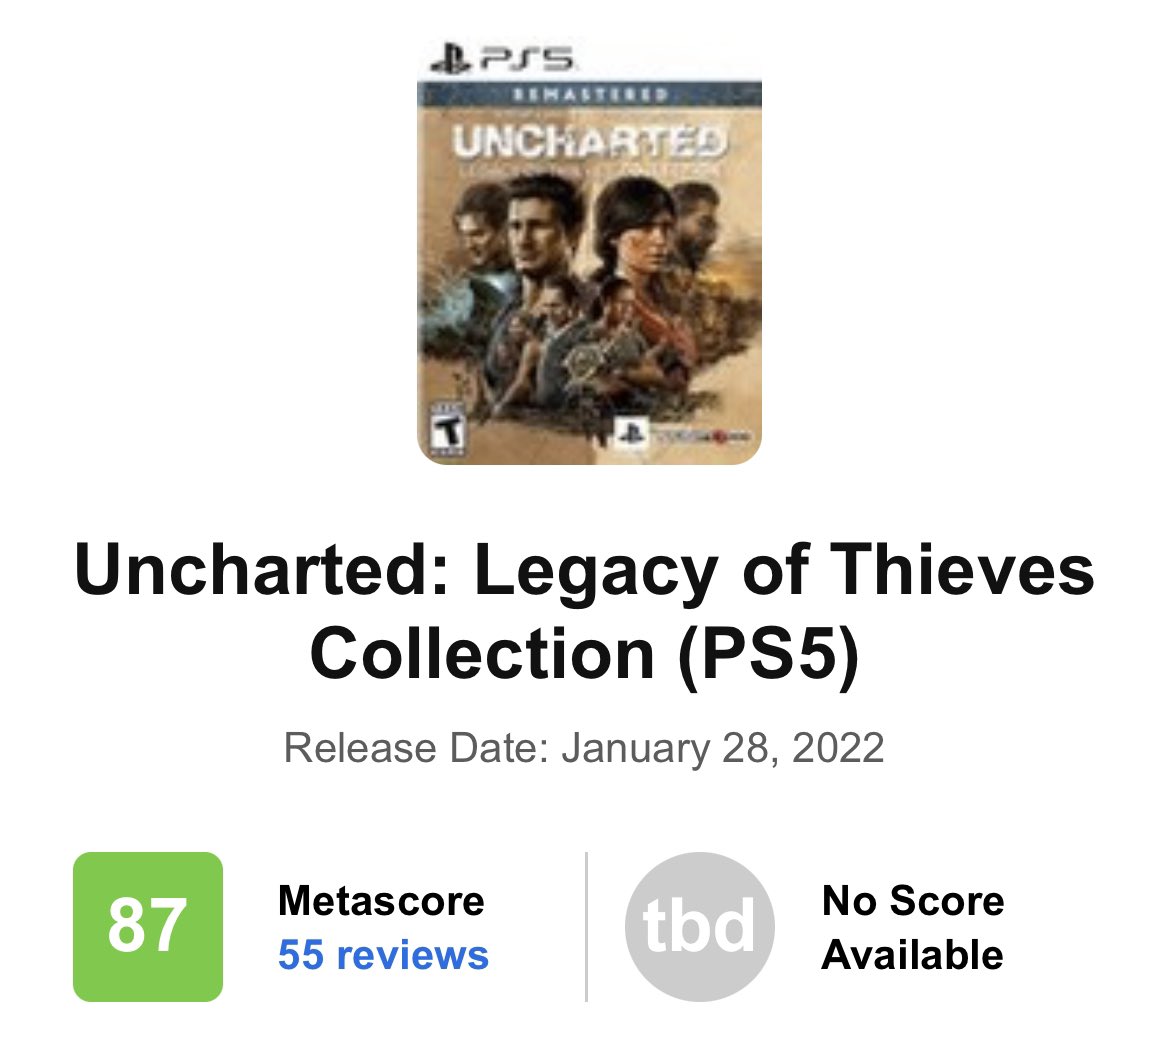 Uncharted: Legacy of Thieves Collection - Metacritic